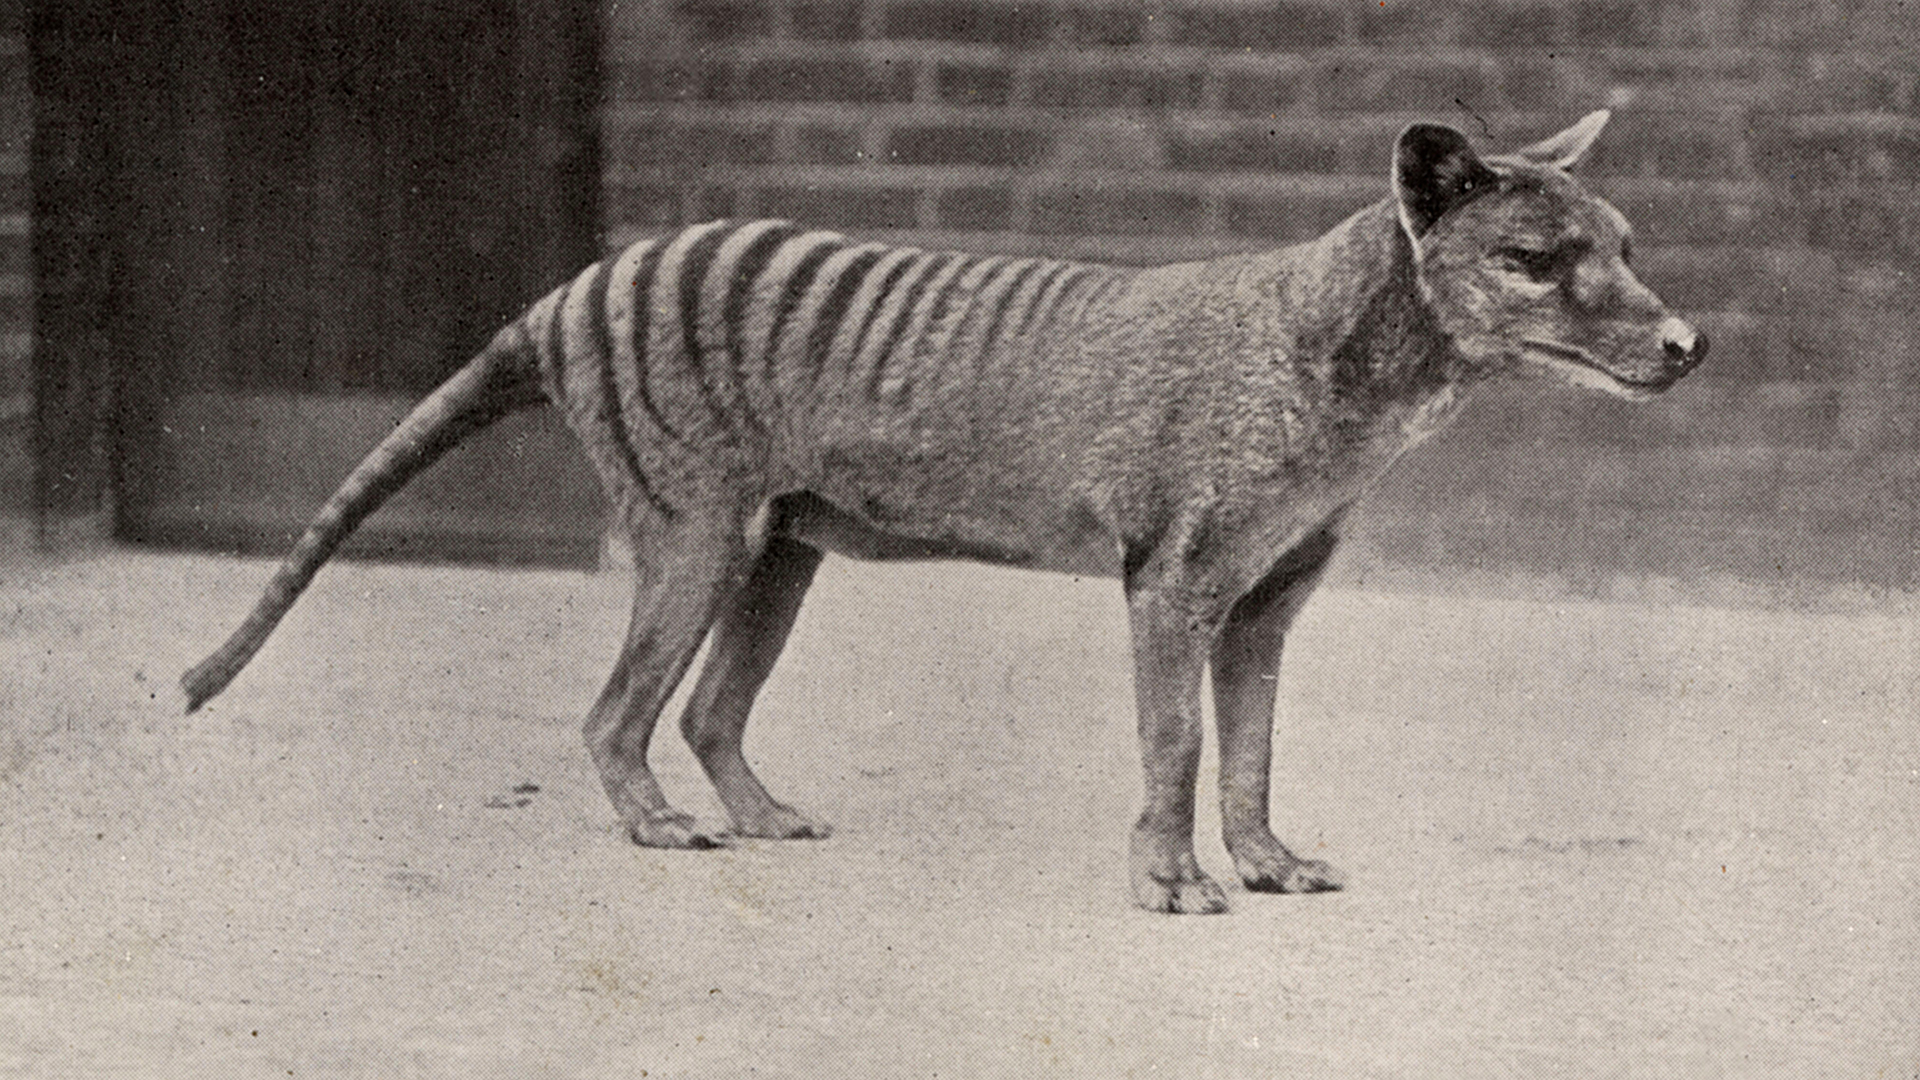 A Tasmanian tiger in captivity at the London Zoo, in the 1910s.